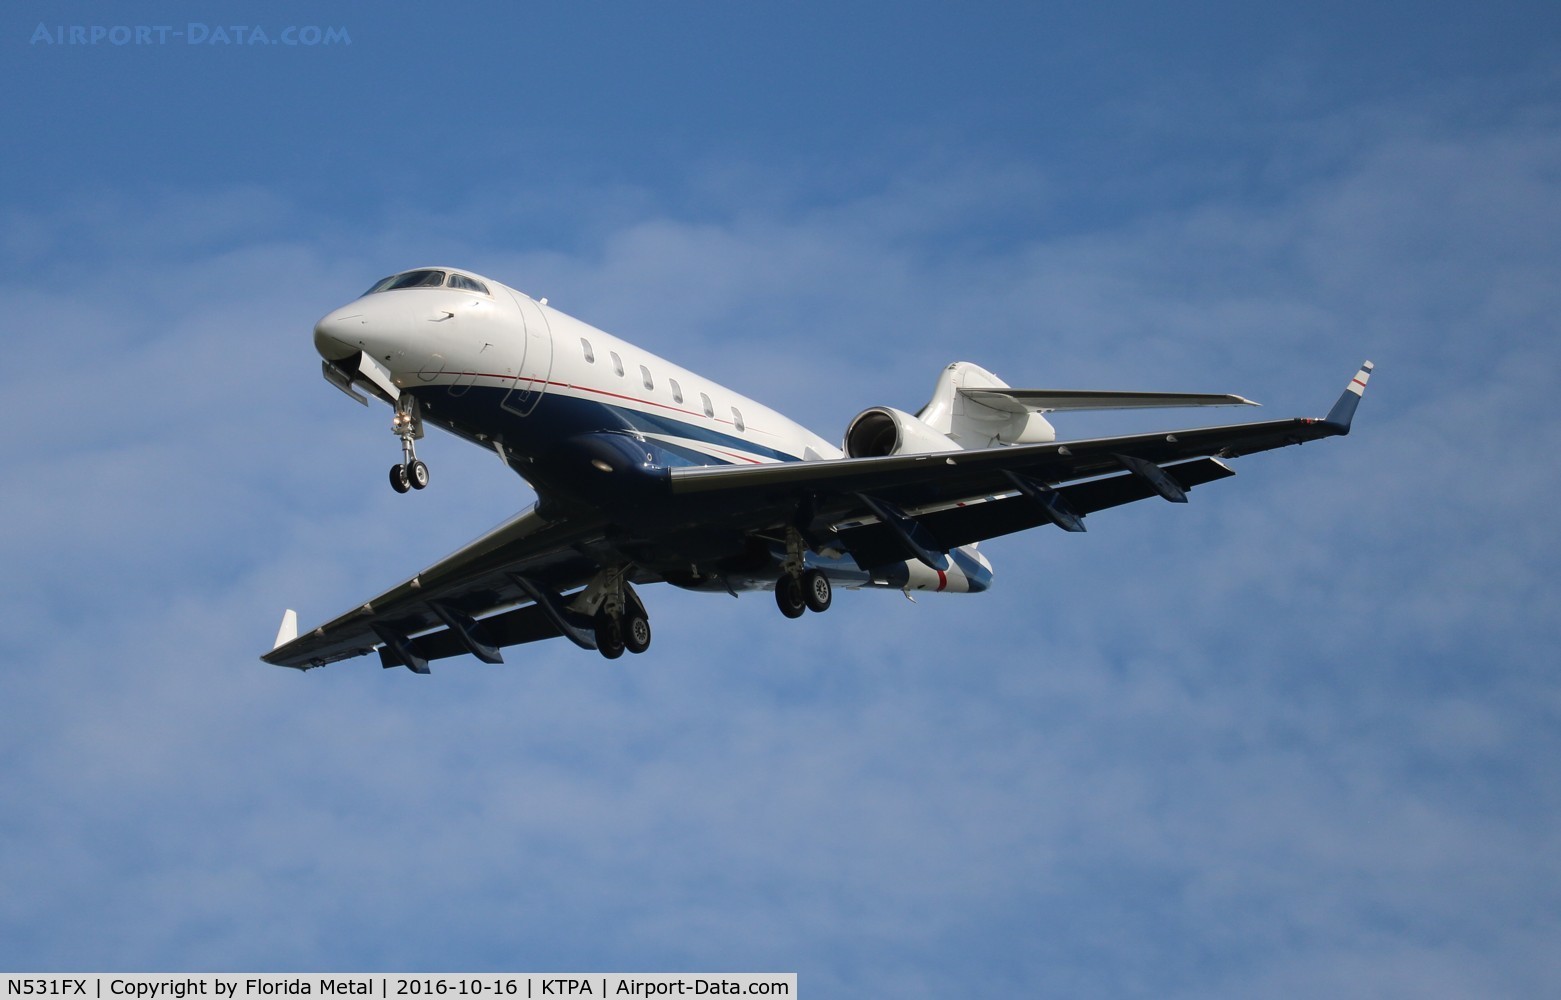 N531FX, 2007 Bombardier Challenger 300 (BD-100-1A10) C/N 20150, Challenger 300 zx